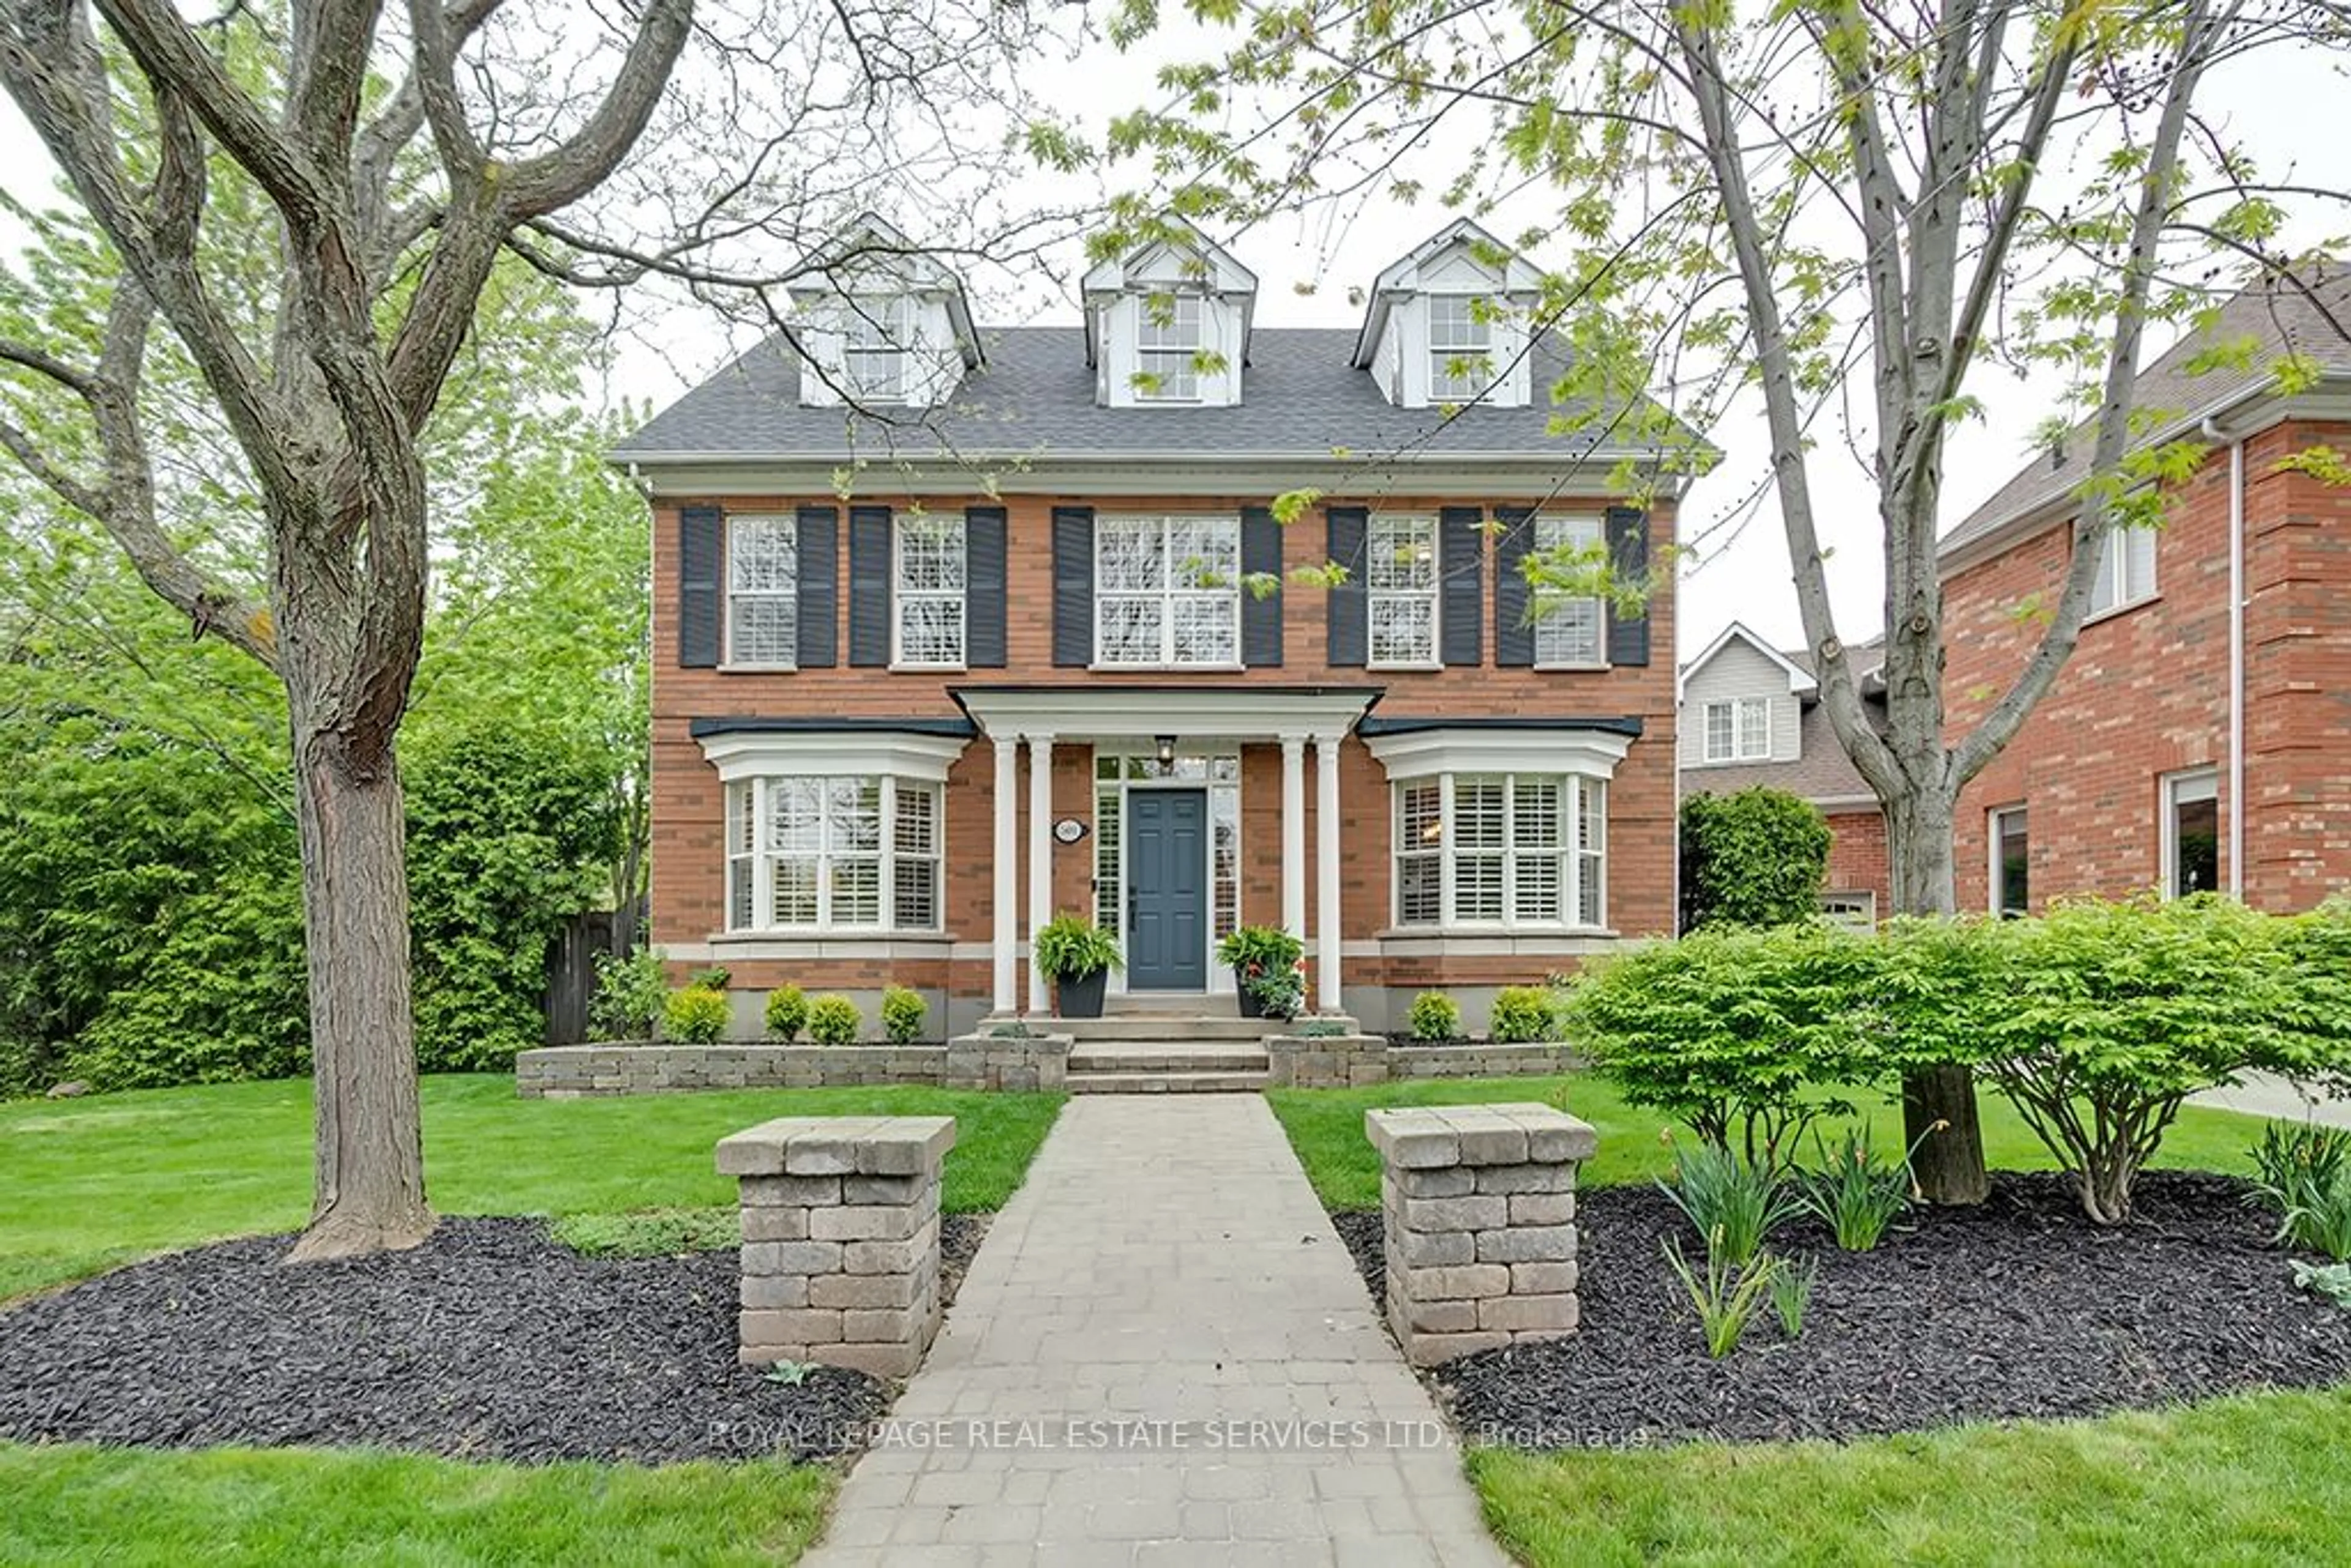 Home with brick exterior material for 501 Doverwood Dr, Oakville Ontario L6H 6N4